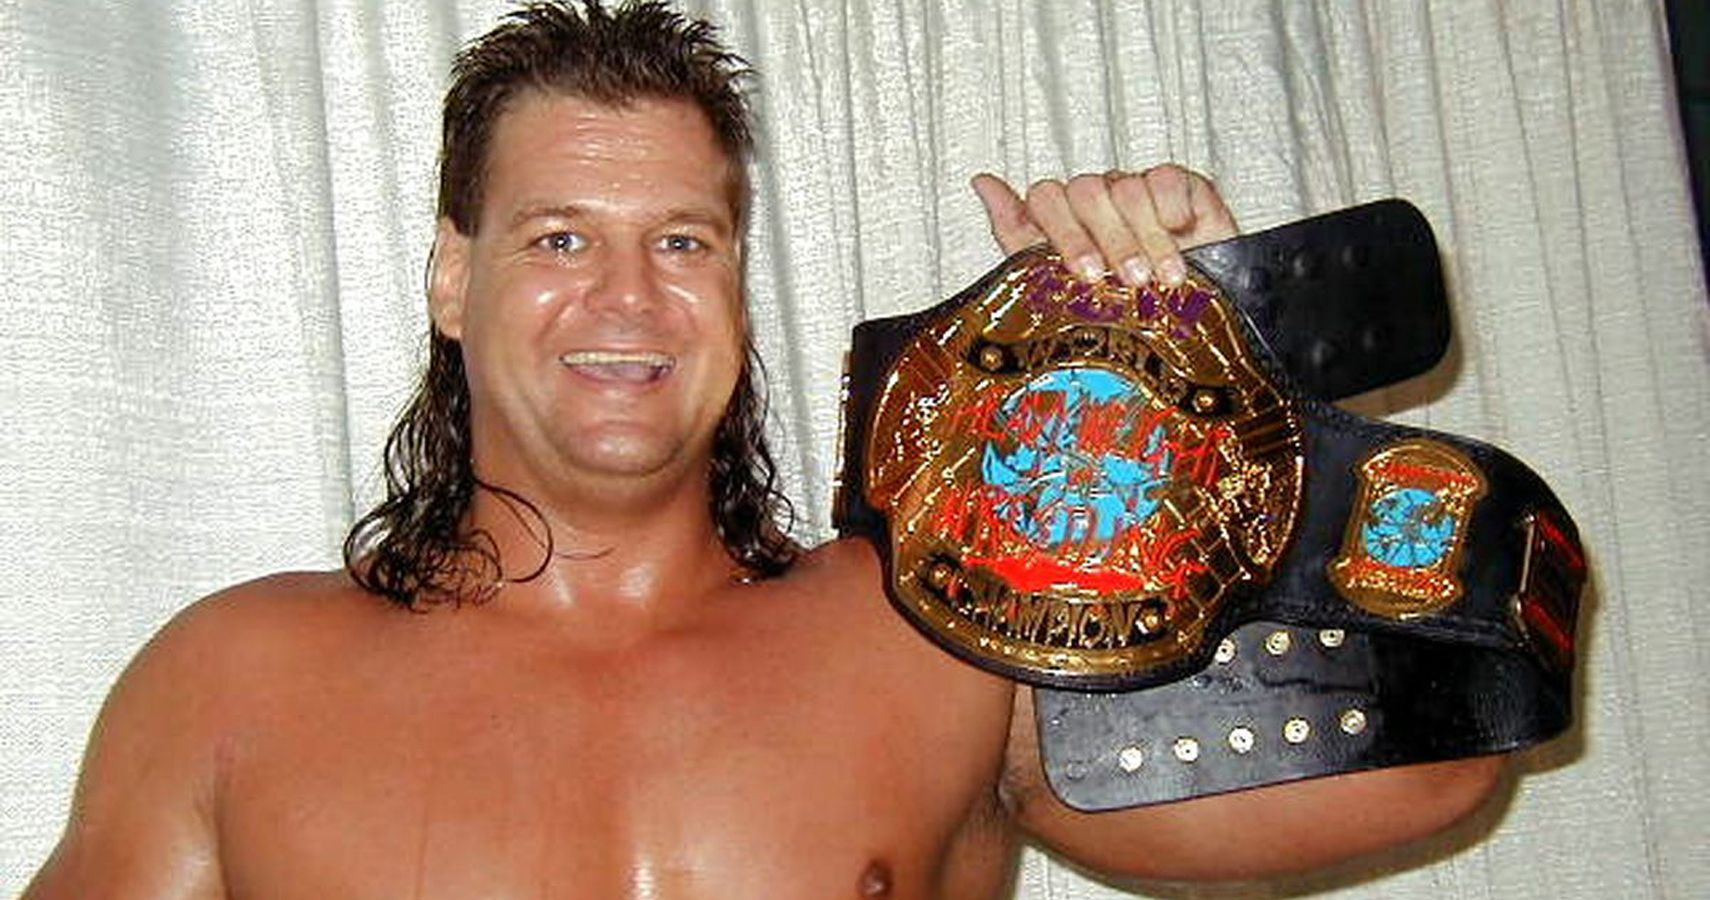 10 ECW Wrestlers That WWE Did Not Want to Succeed